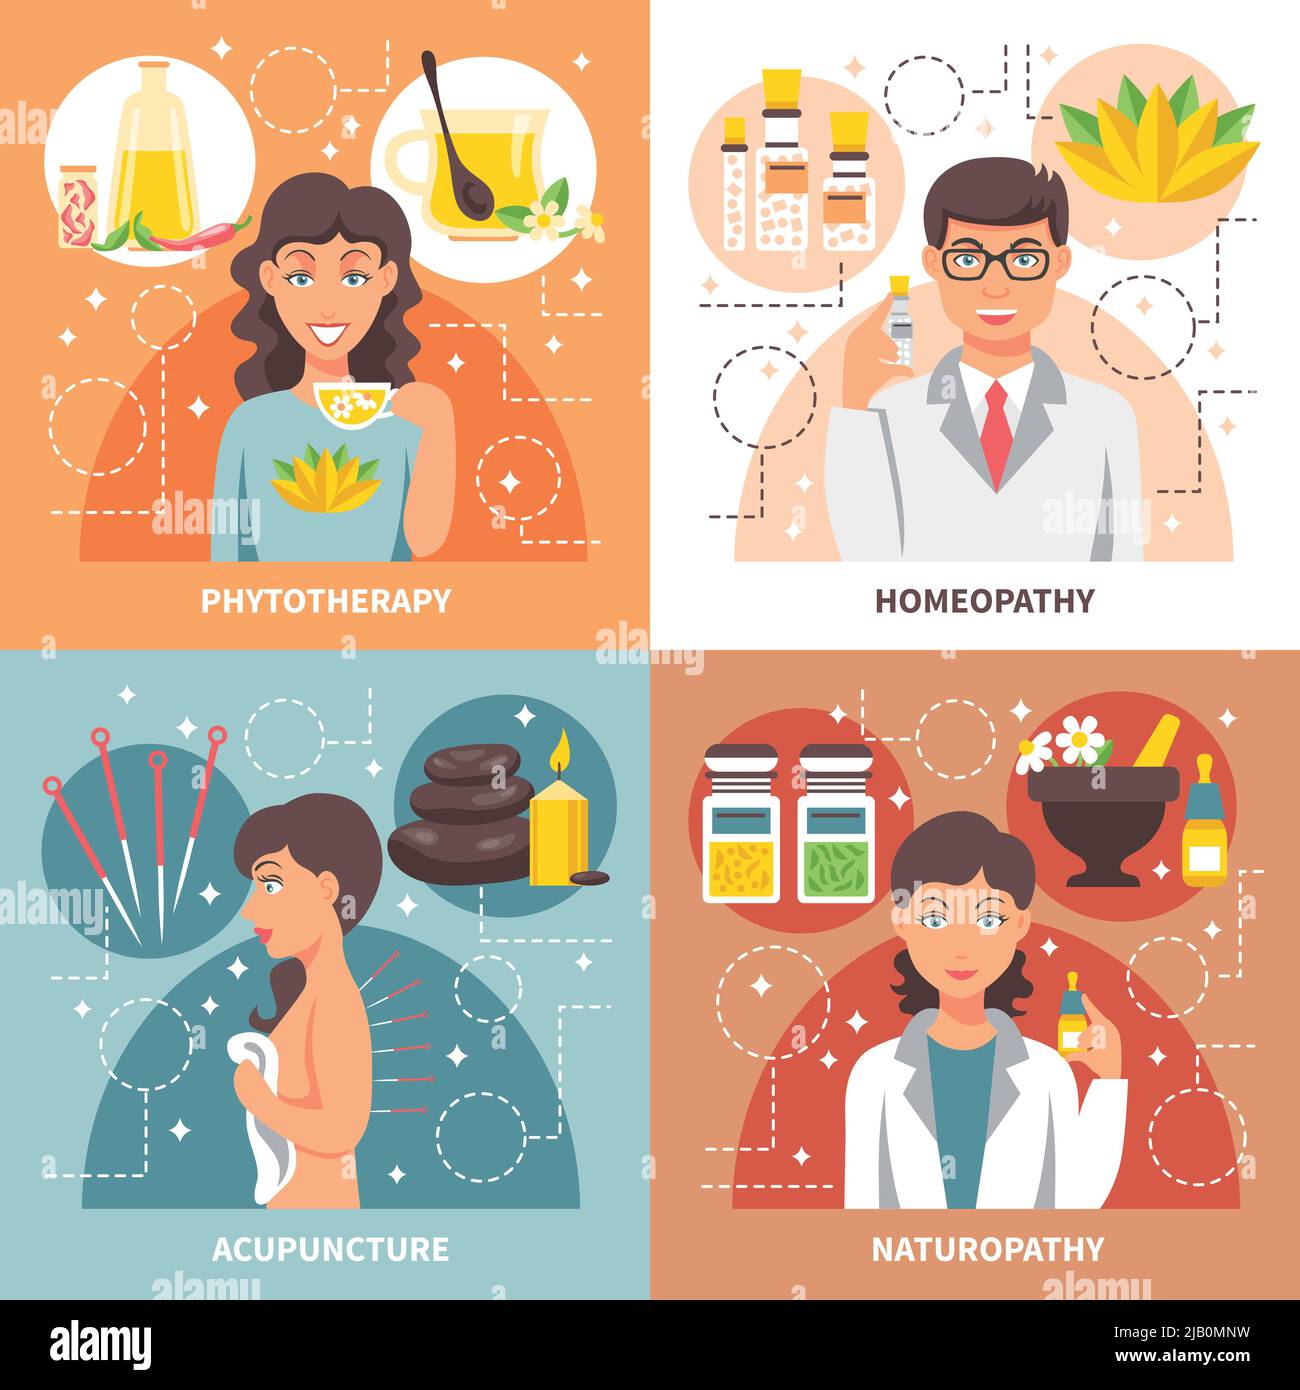 Alternative medicine 2x2 concept set of homeopathy phytotherapy naturopathy acupuncture  flat design compositions vector illustration Stock Vector